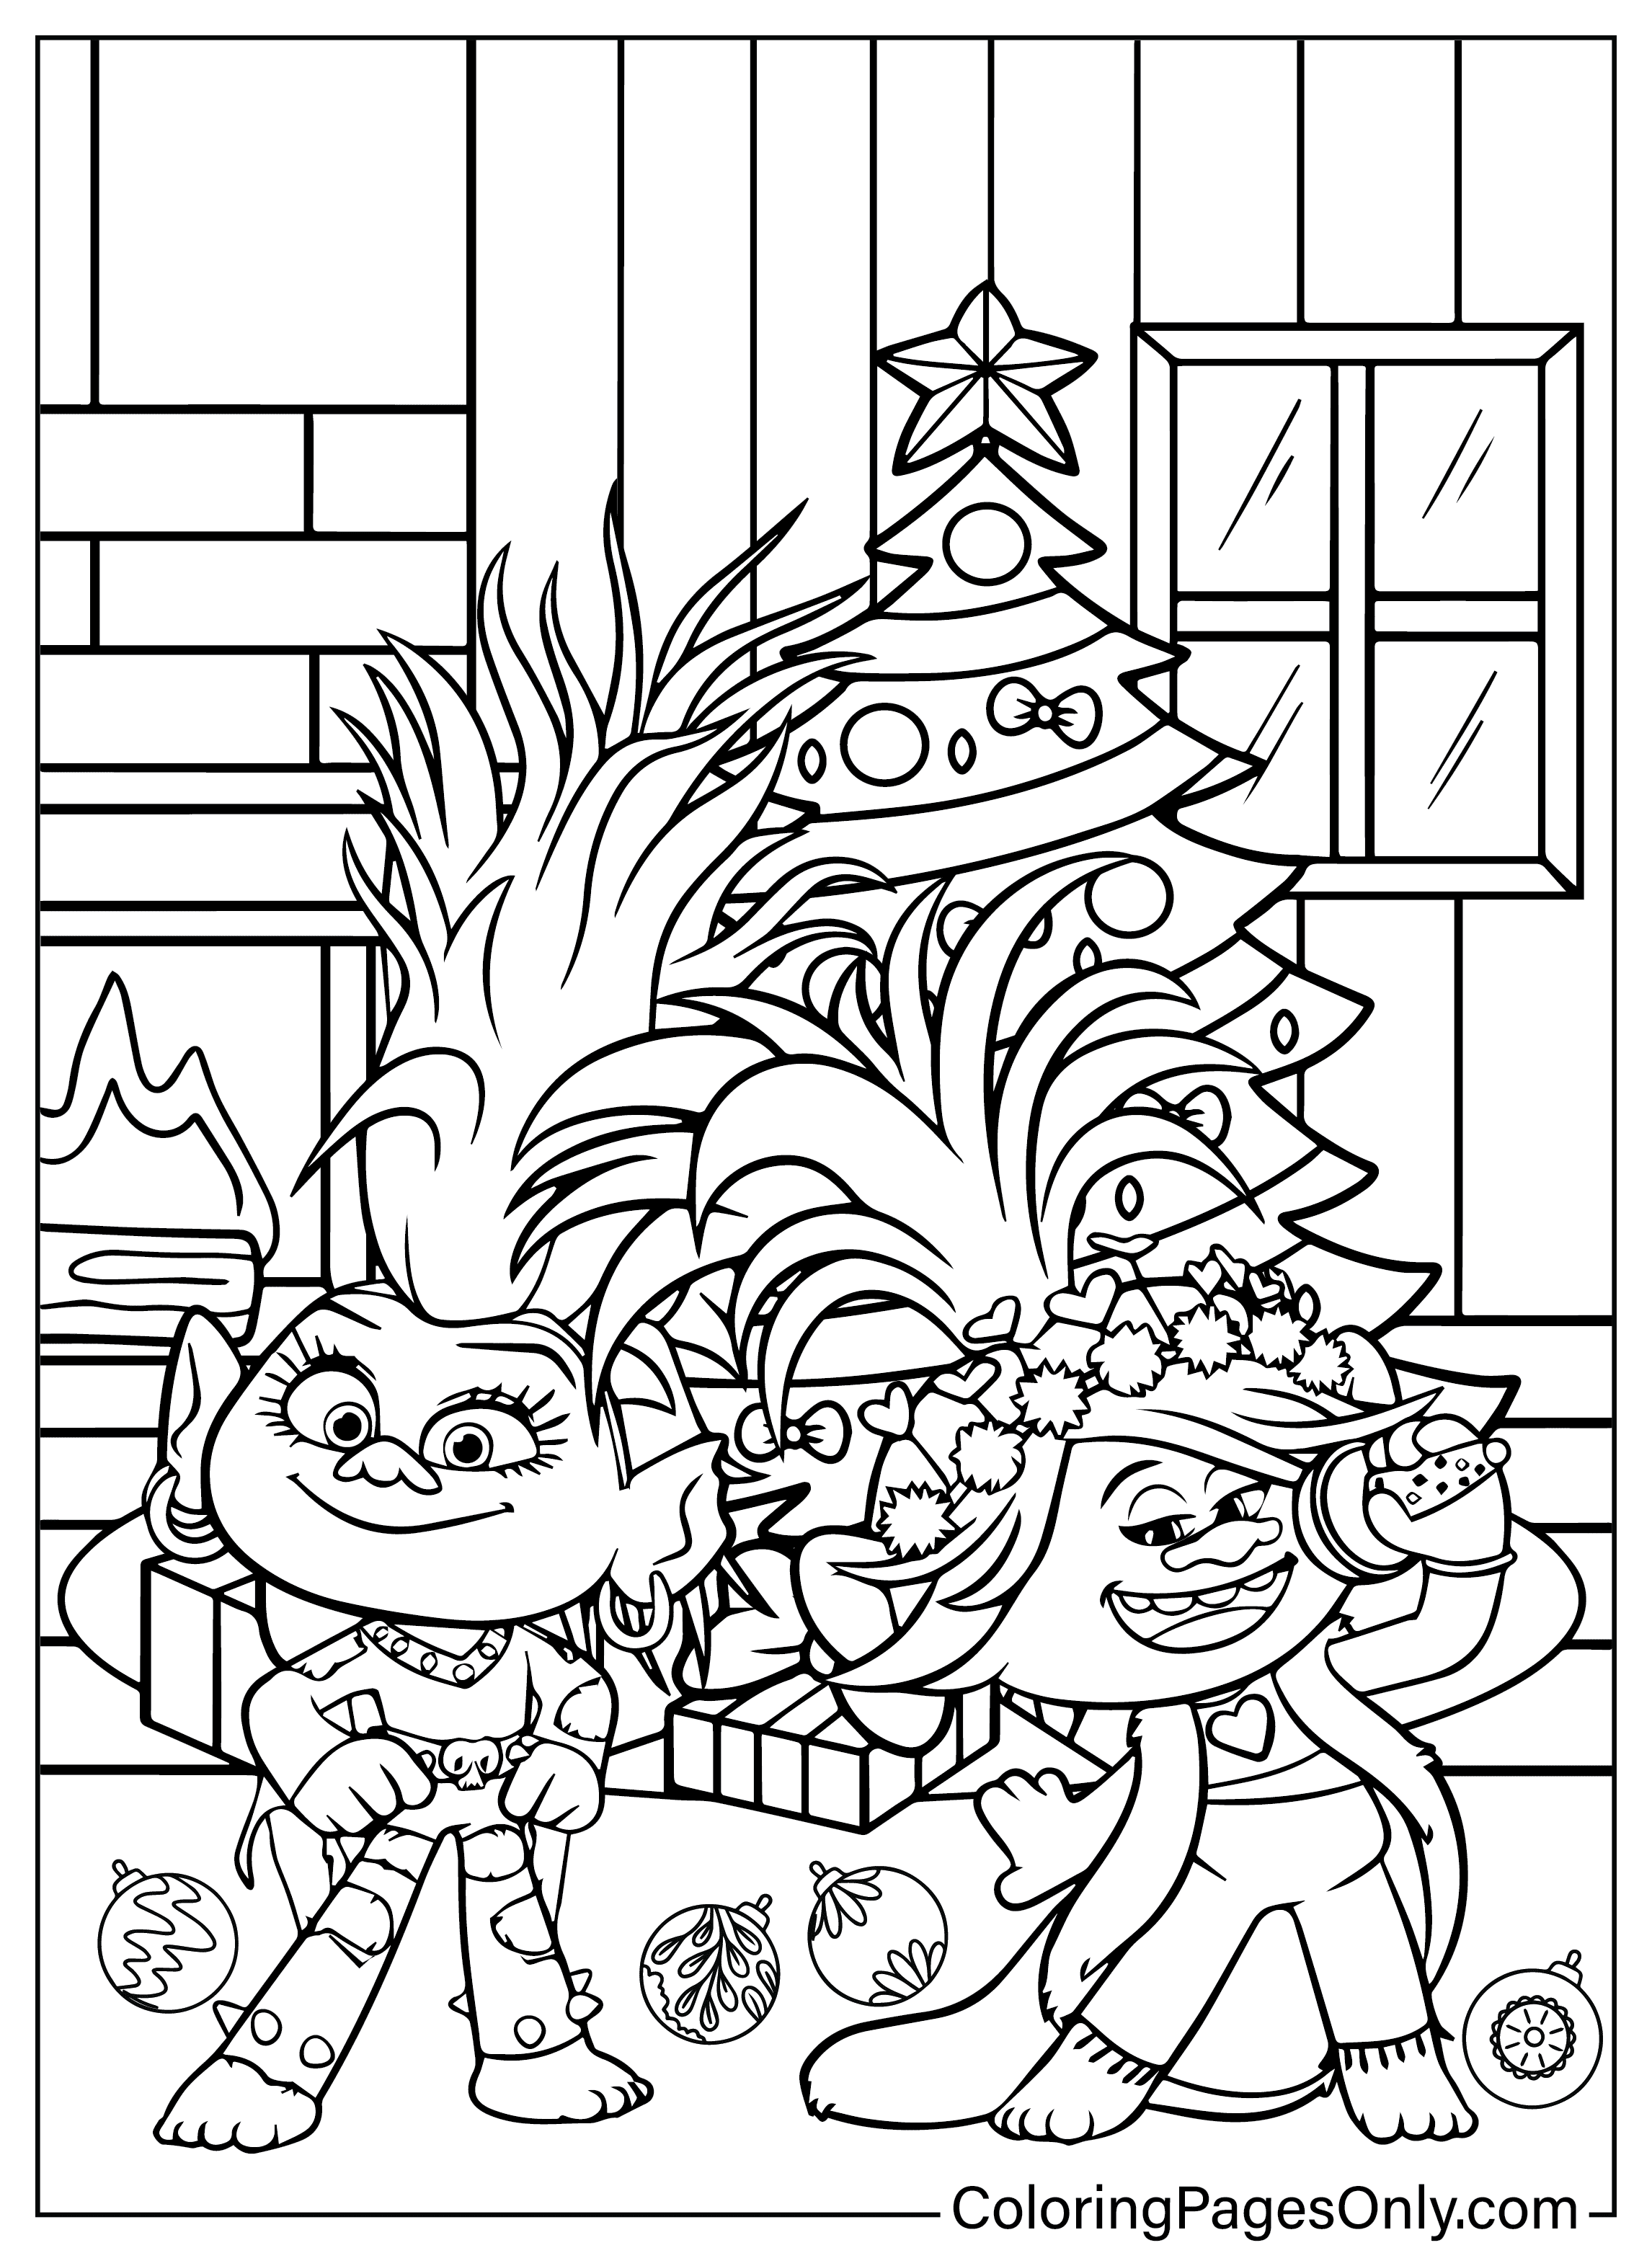 Christmas Trolls Coloring Page from Christmas Cartoon